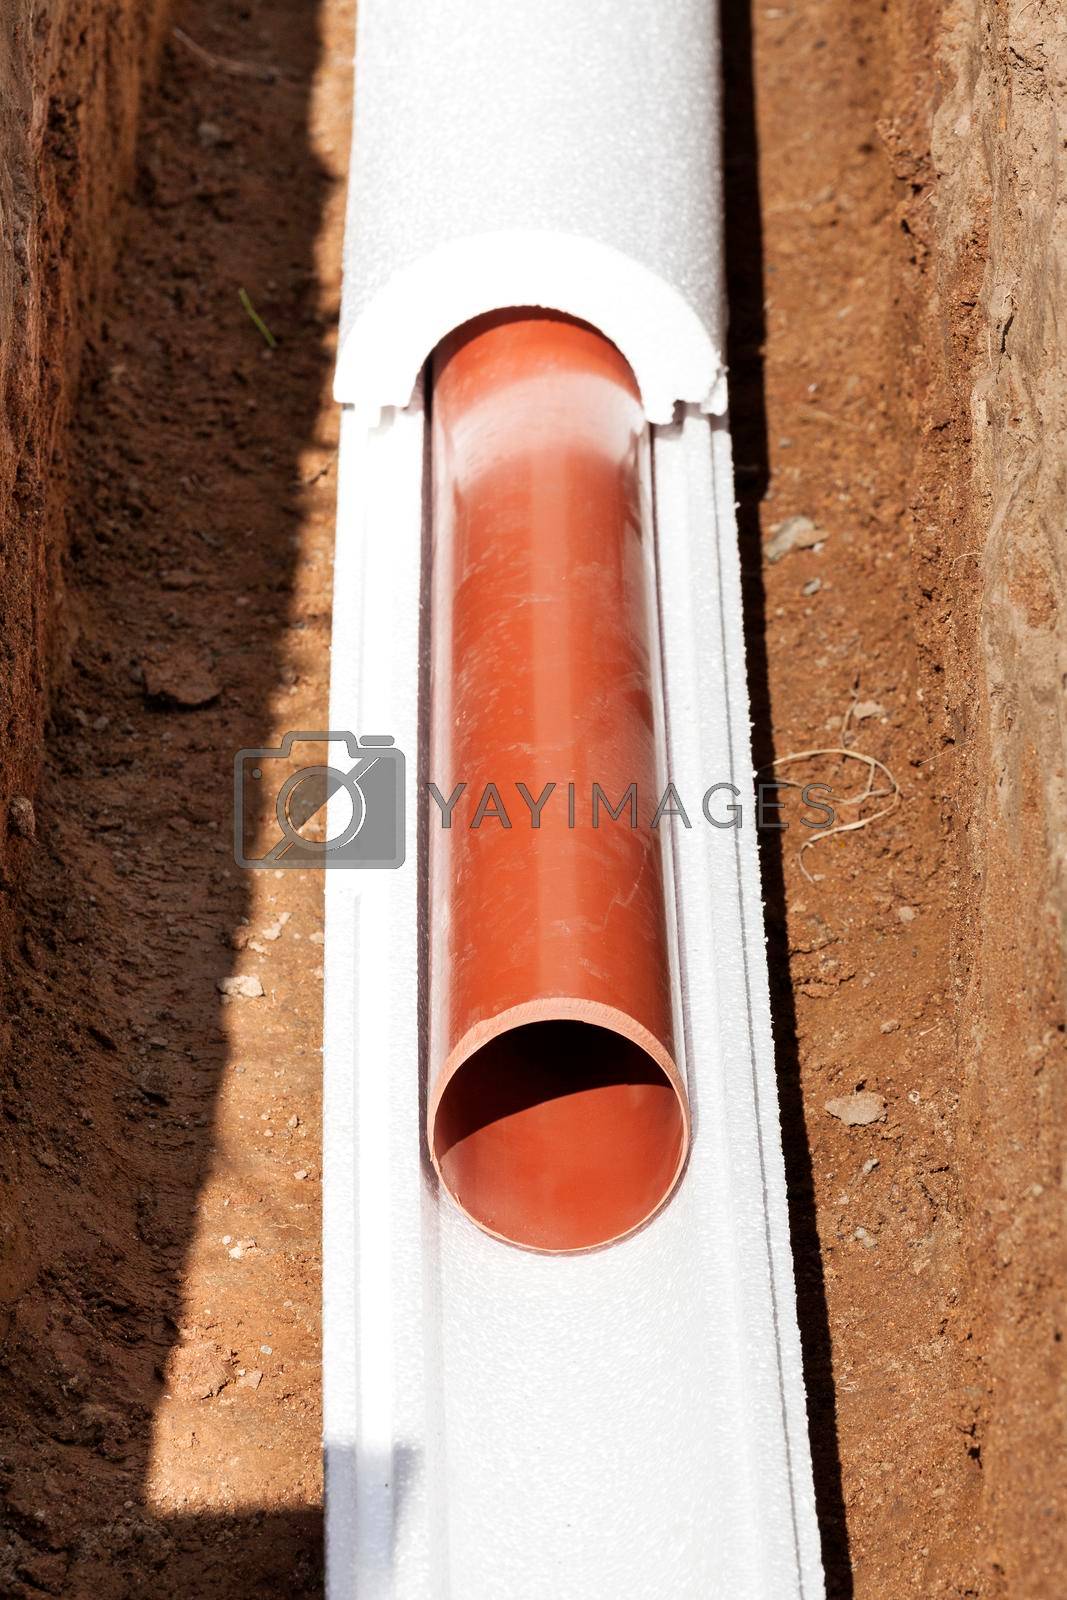 Royalty free image of Installation of water main, sanitary sewer, storm drain systems, plastic pipes wrapped in insulation by Nobilior